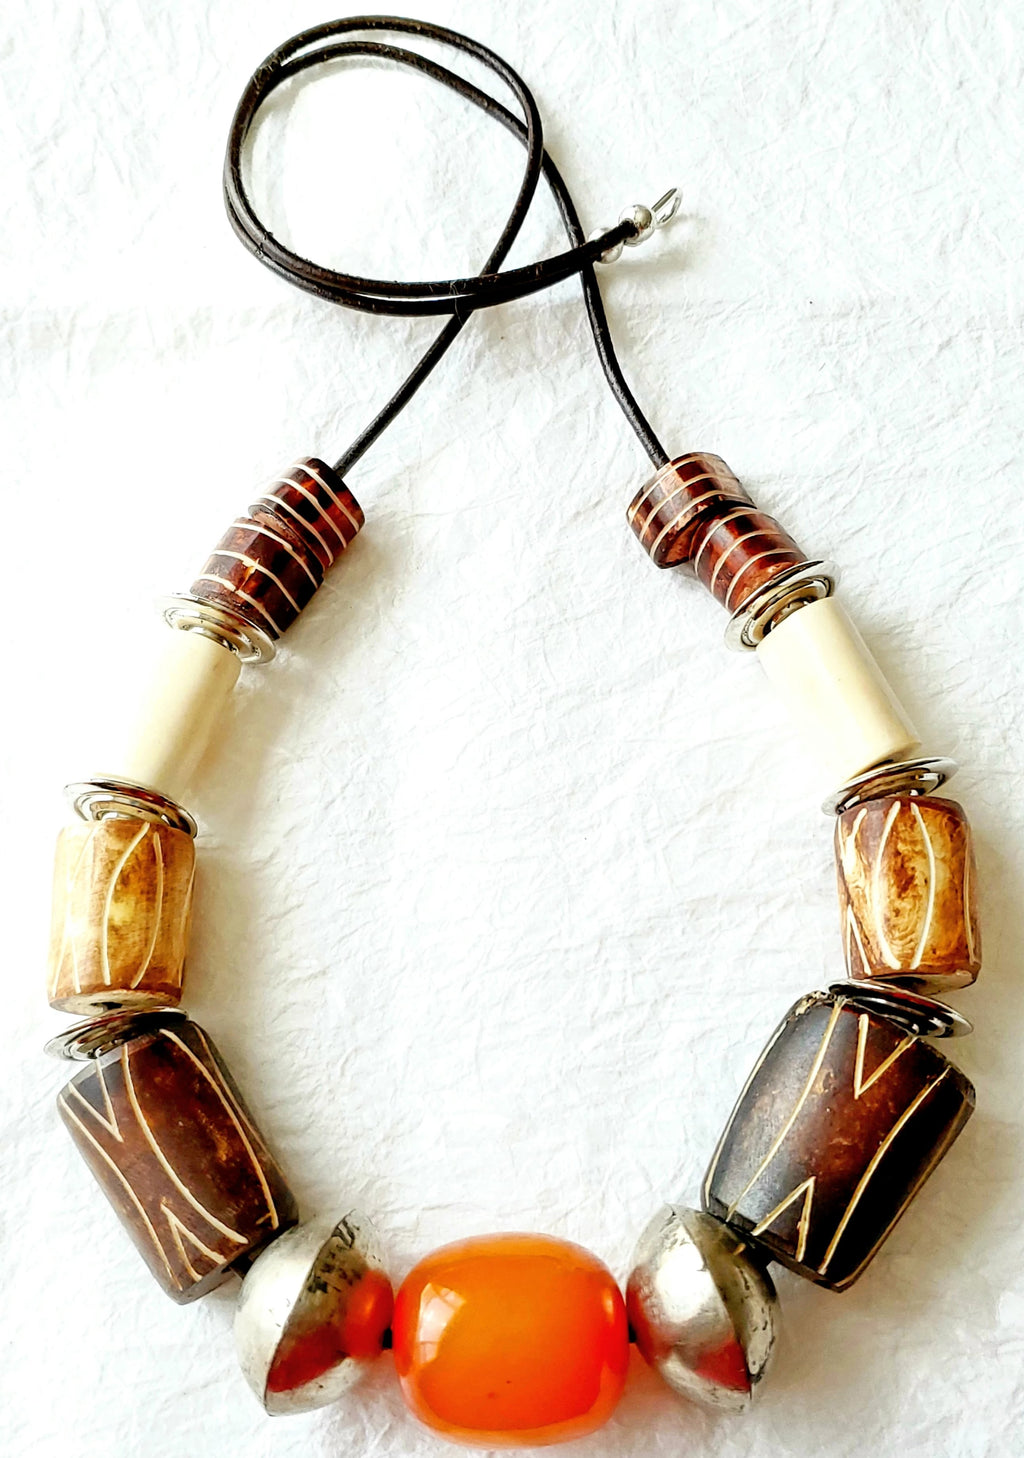 Mens Carved Bone Leather Necklace